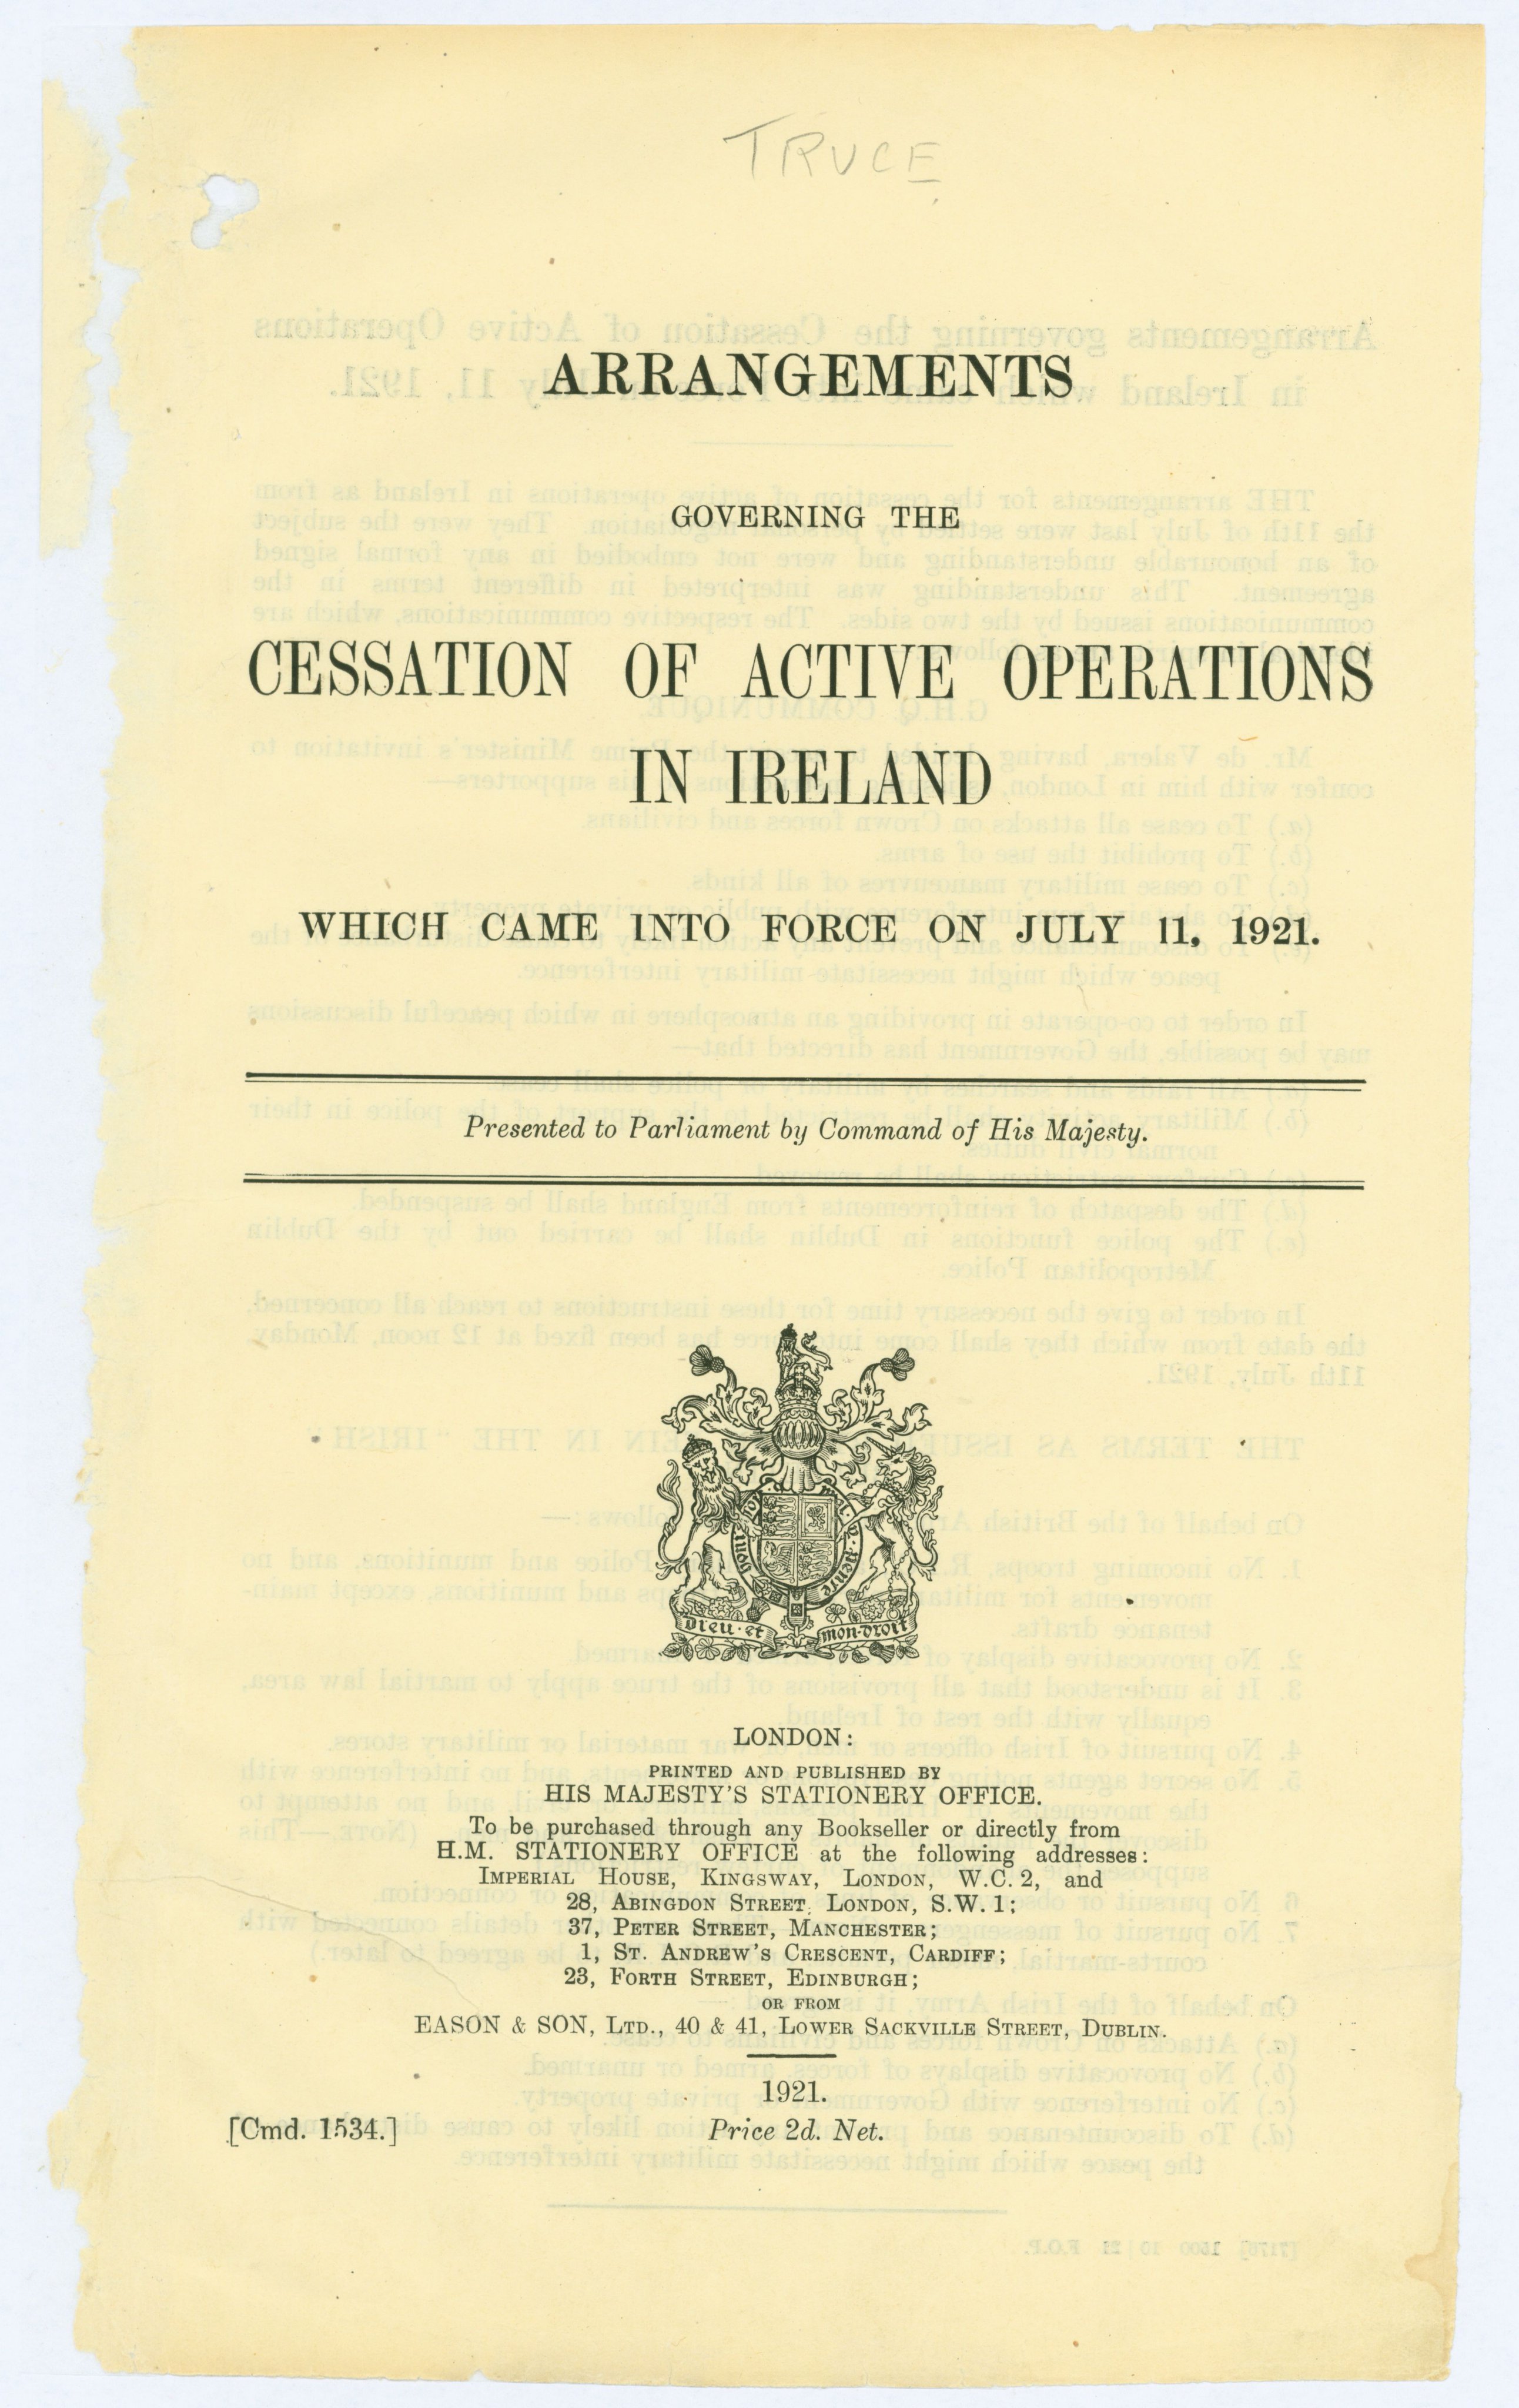 Published copy of truce terms put before the British Parliament 11 July 1921, NAI ref: DE/2/302/256-257